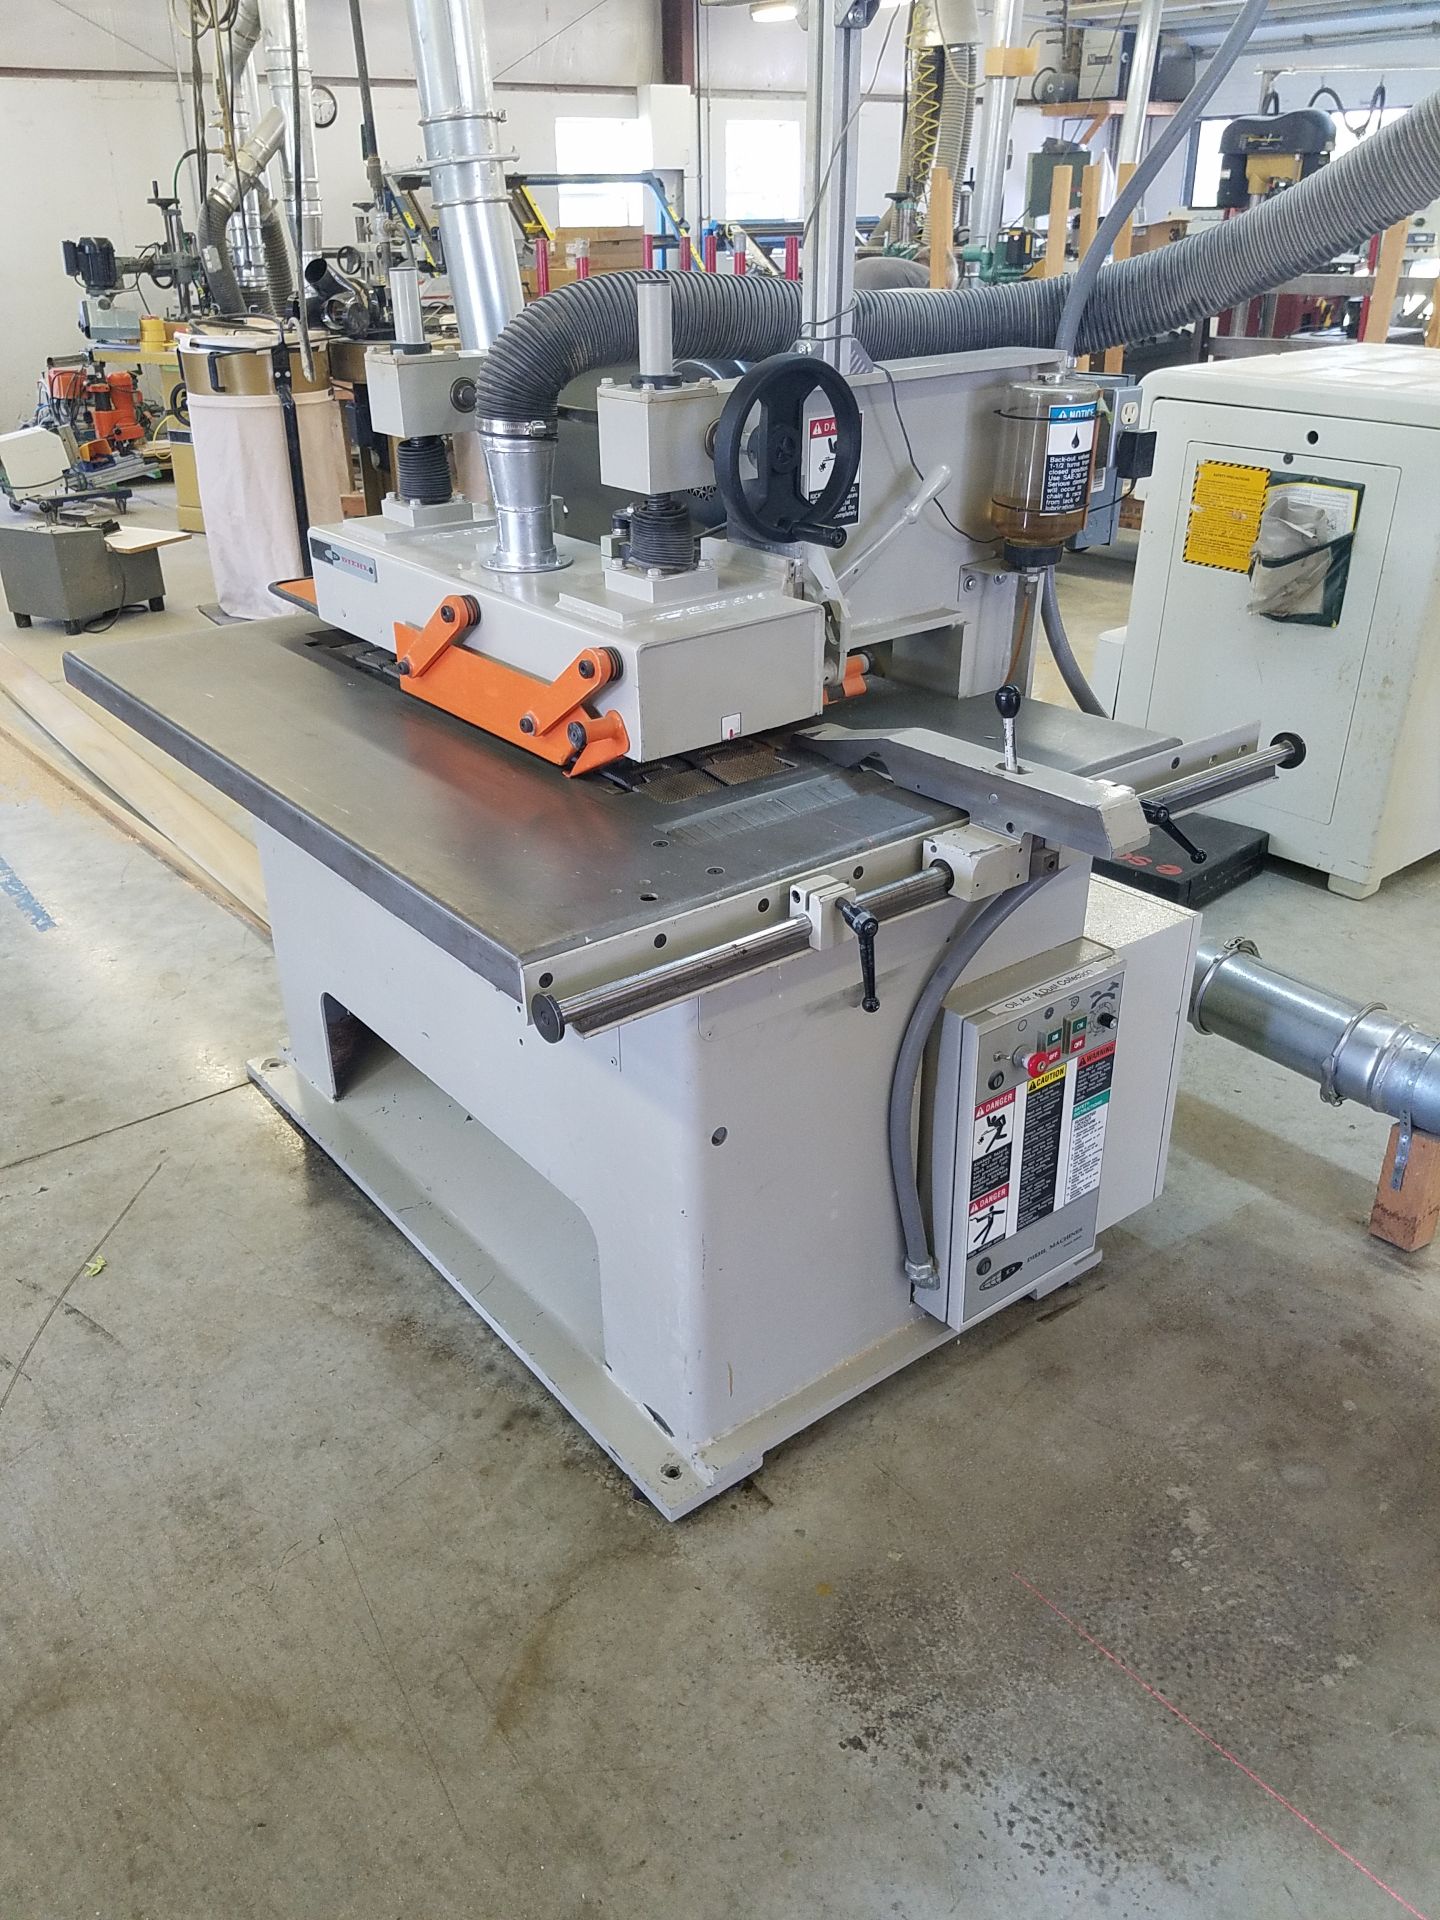 Diehl SL-30 Straight Line Rip Saw, 15 HP, 1.5 HP Feed Motor, Diode Laser, Adjustable Rip Fence, - Image 3 of 22